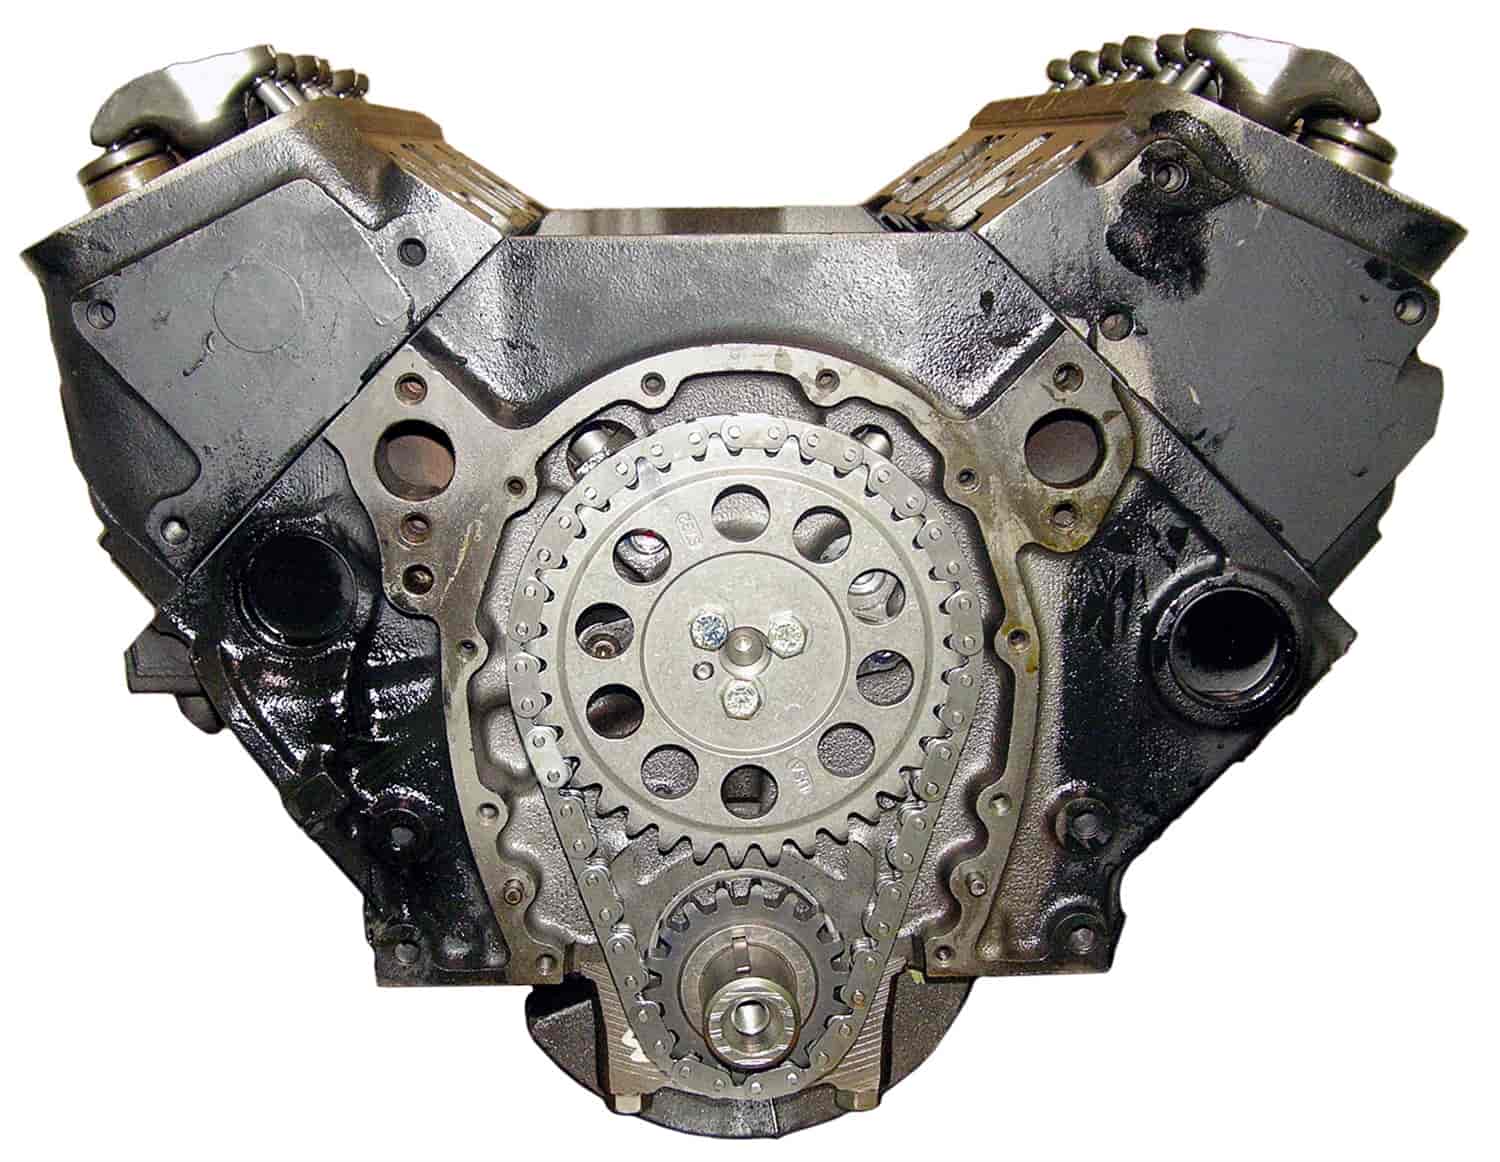 Remanufactured Crate Engine for 1992 Chevy/GMC Truck & Van with 4.3L V6